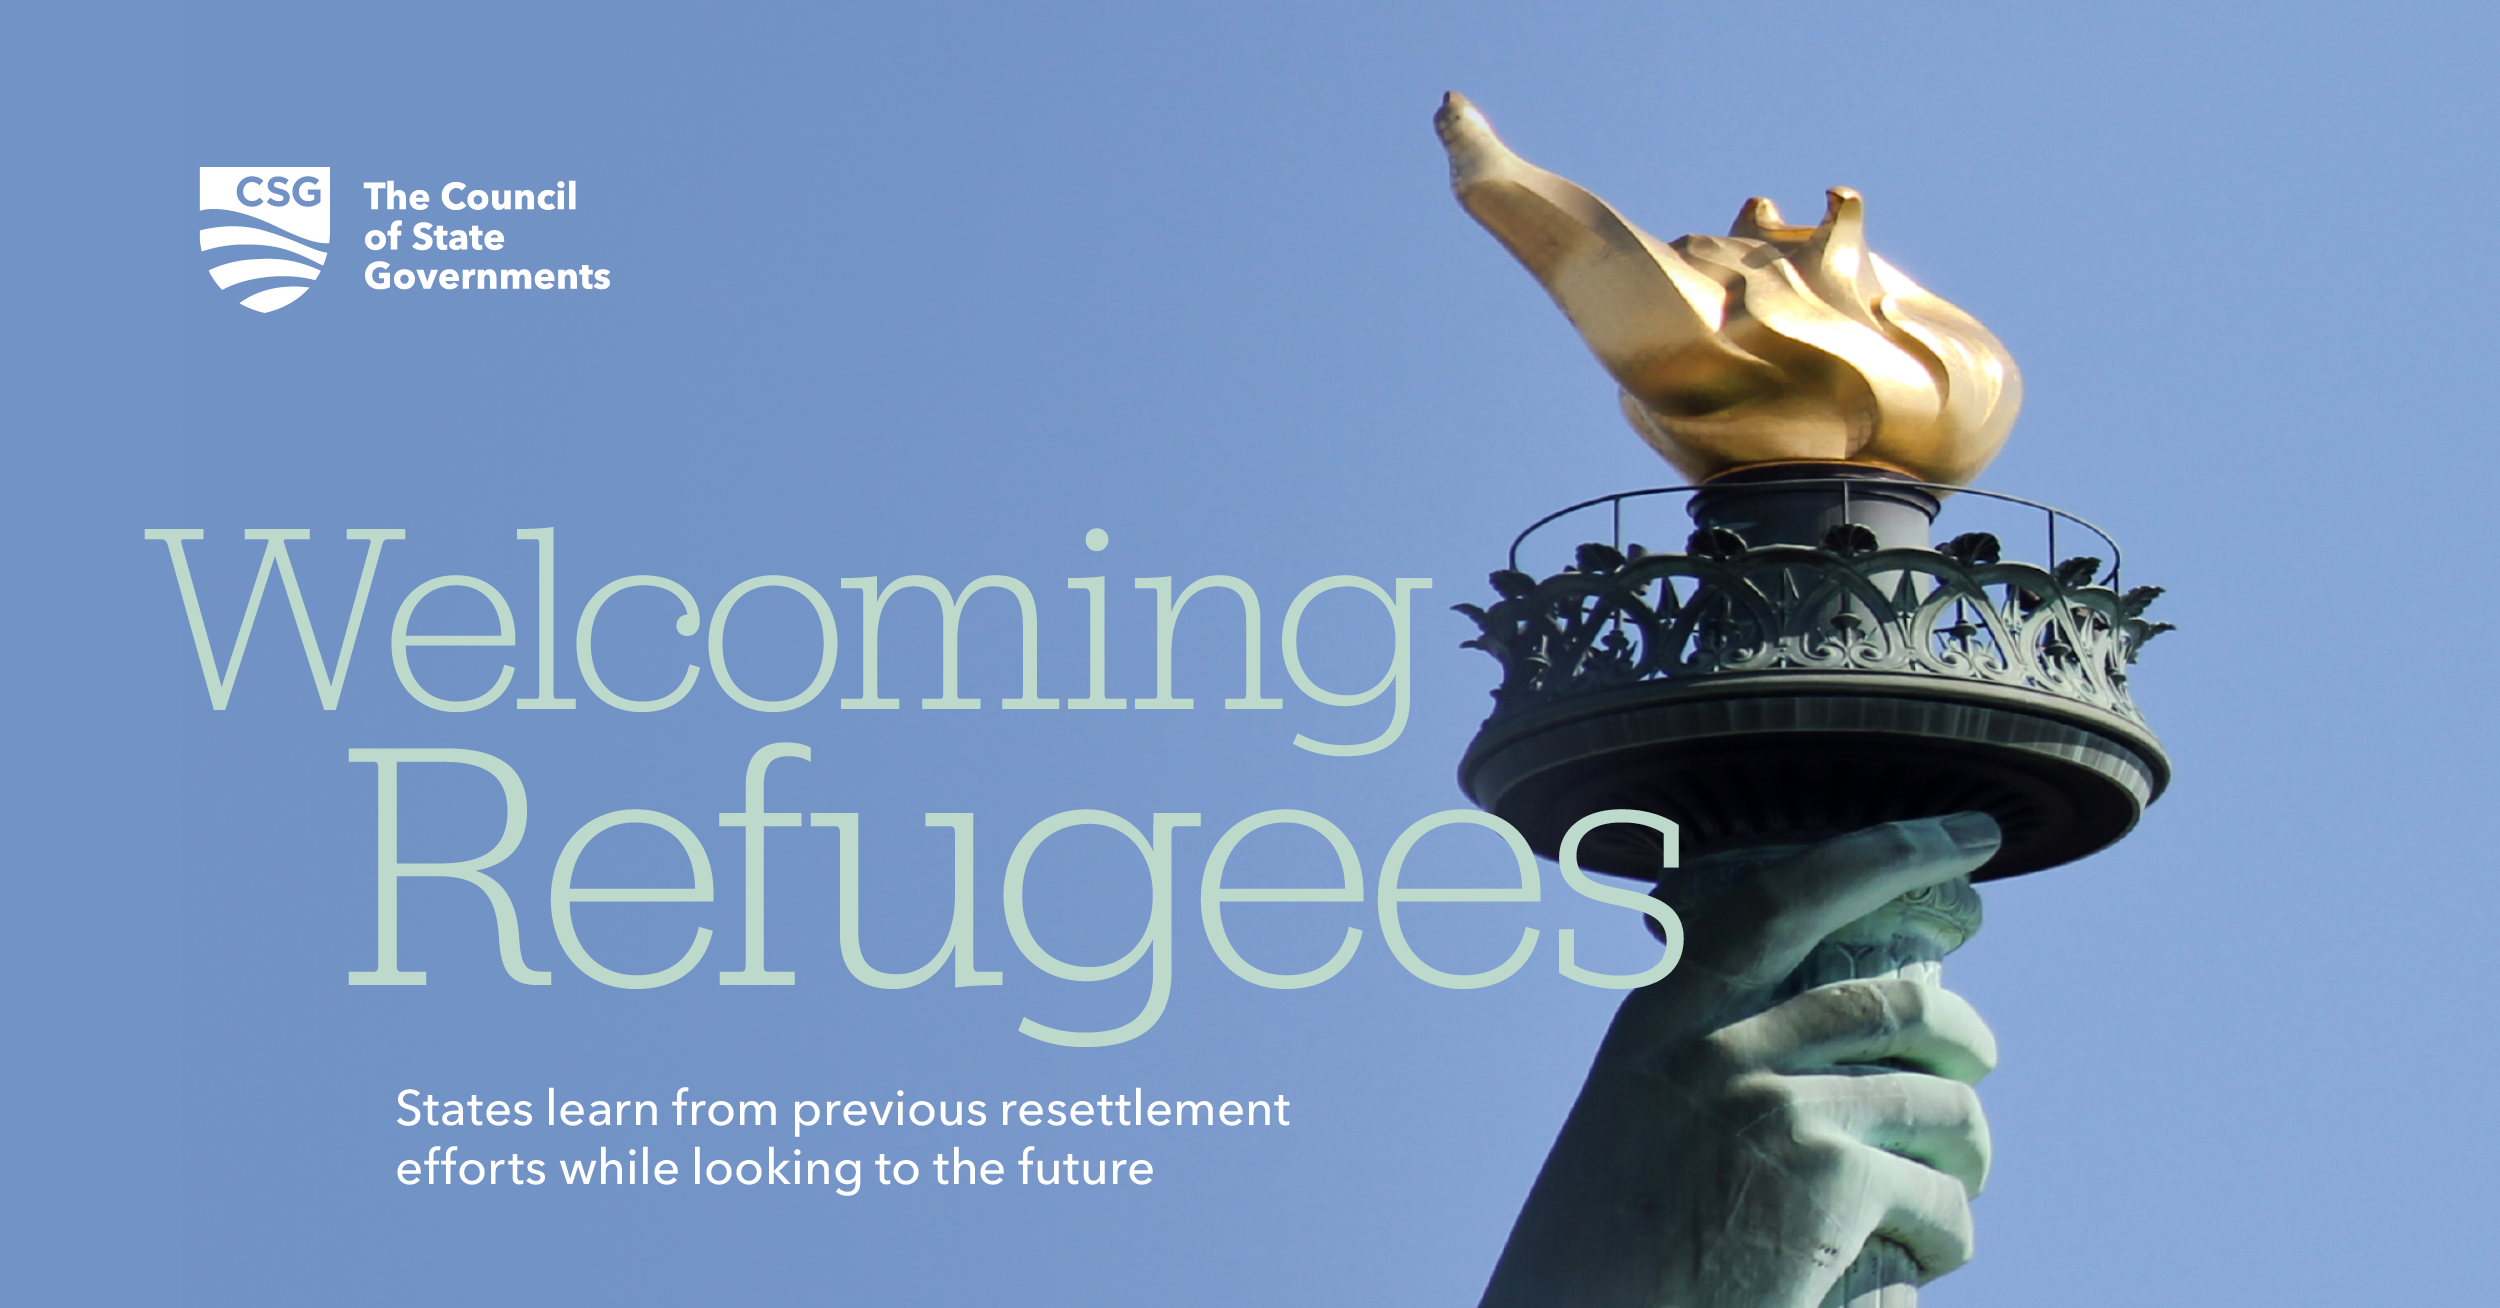 A closeup of the Statue of Liberty with text that reads "Welcoming Refugees"